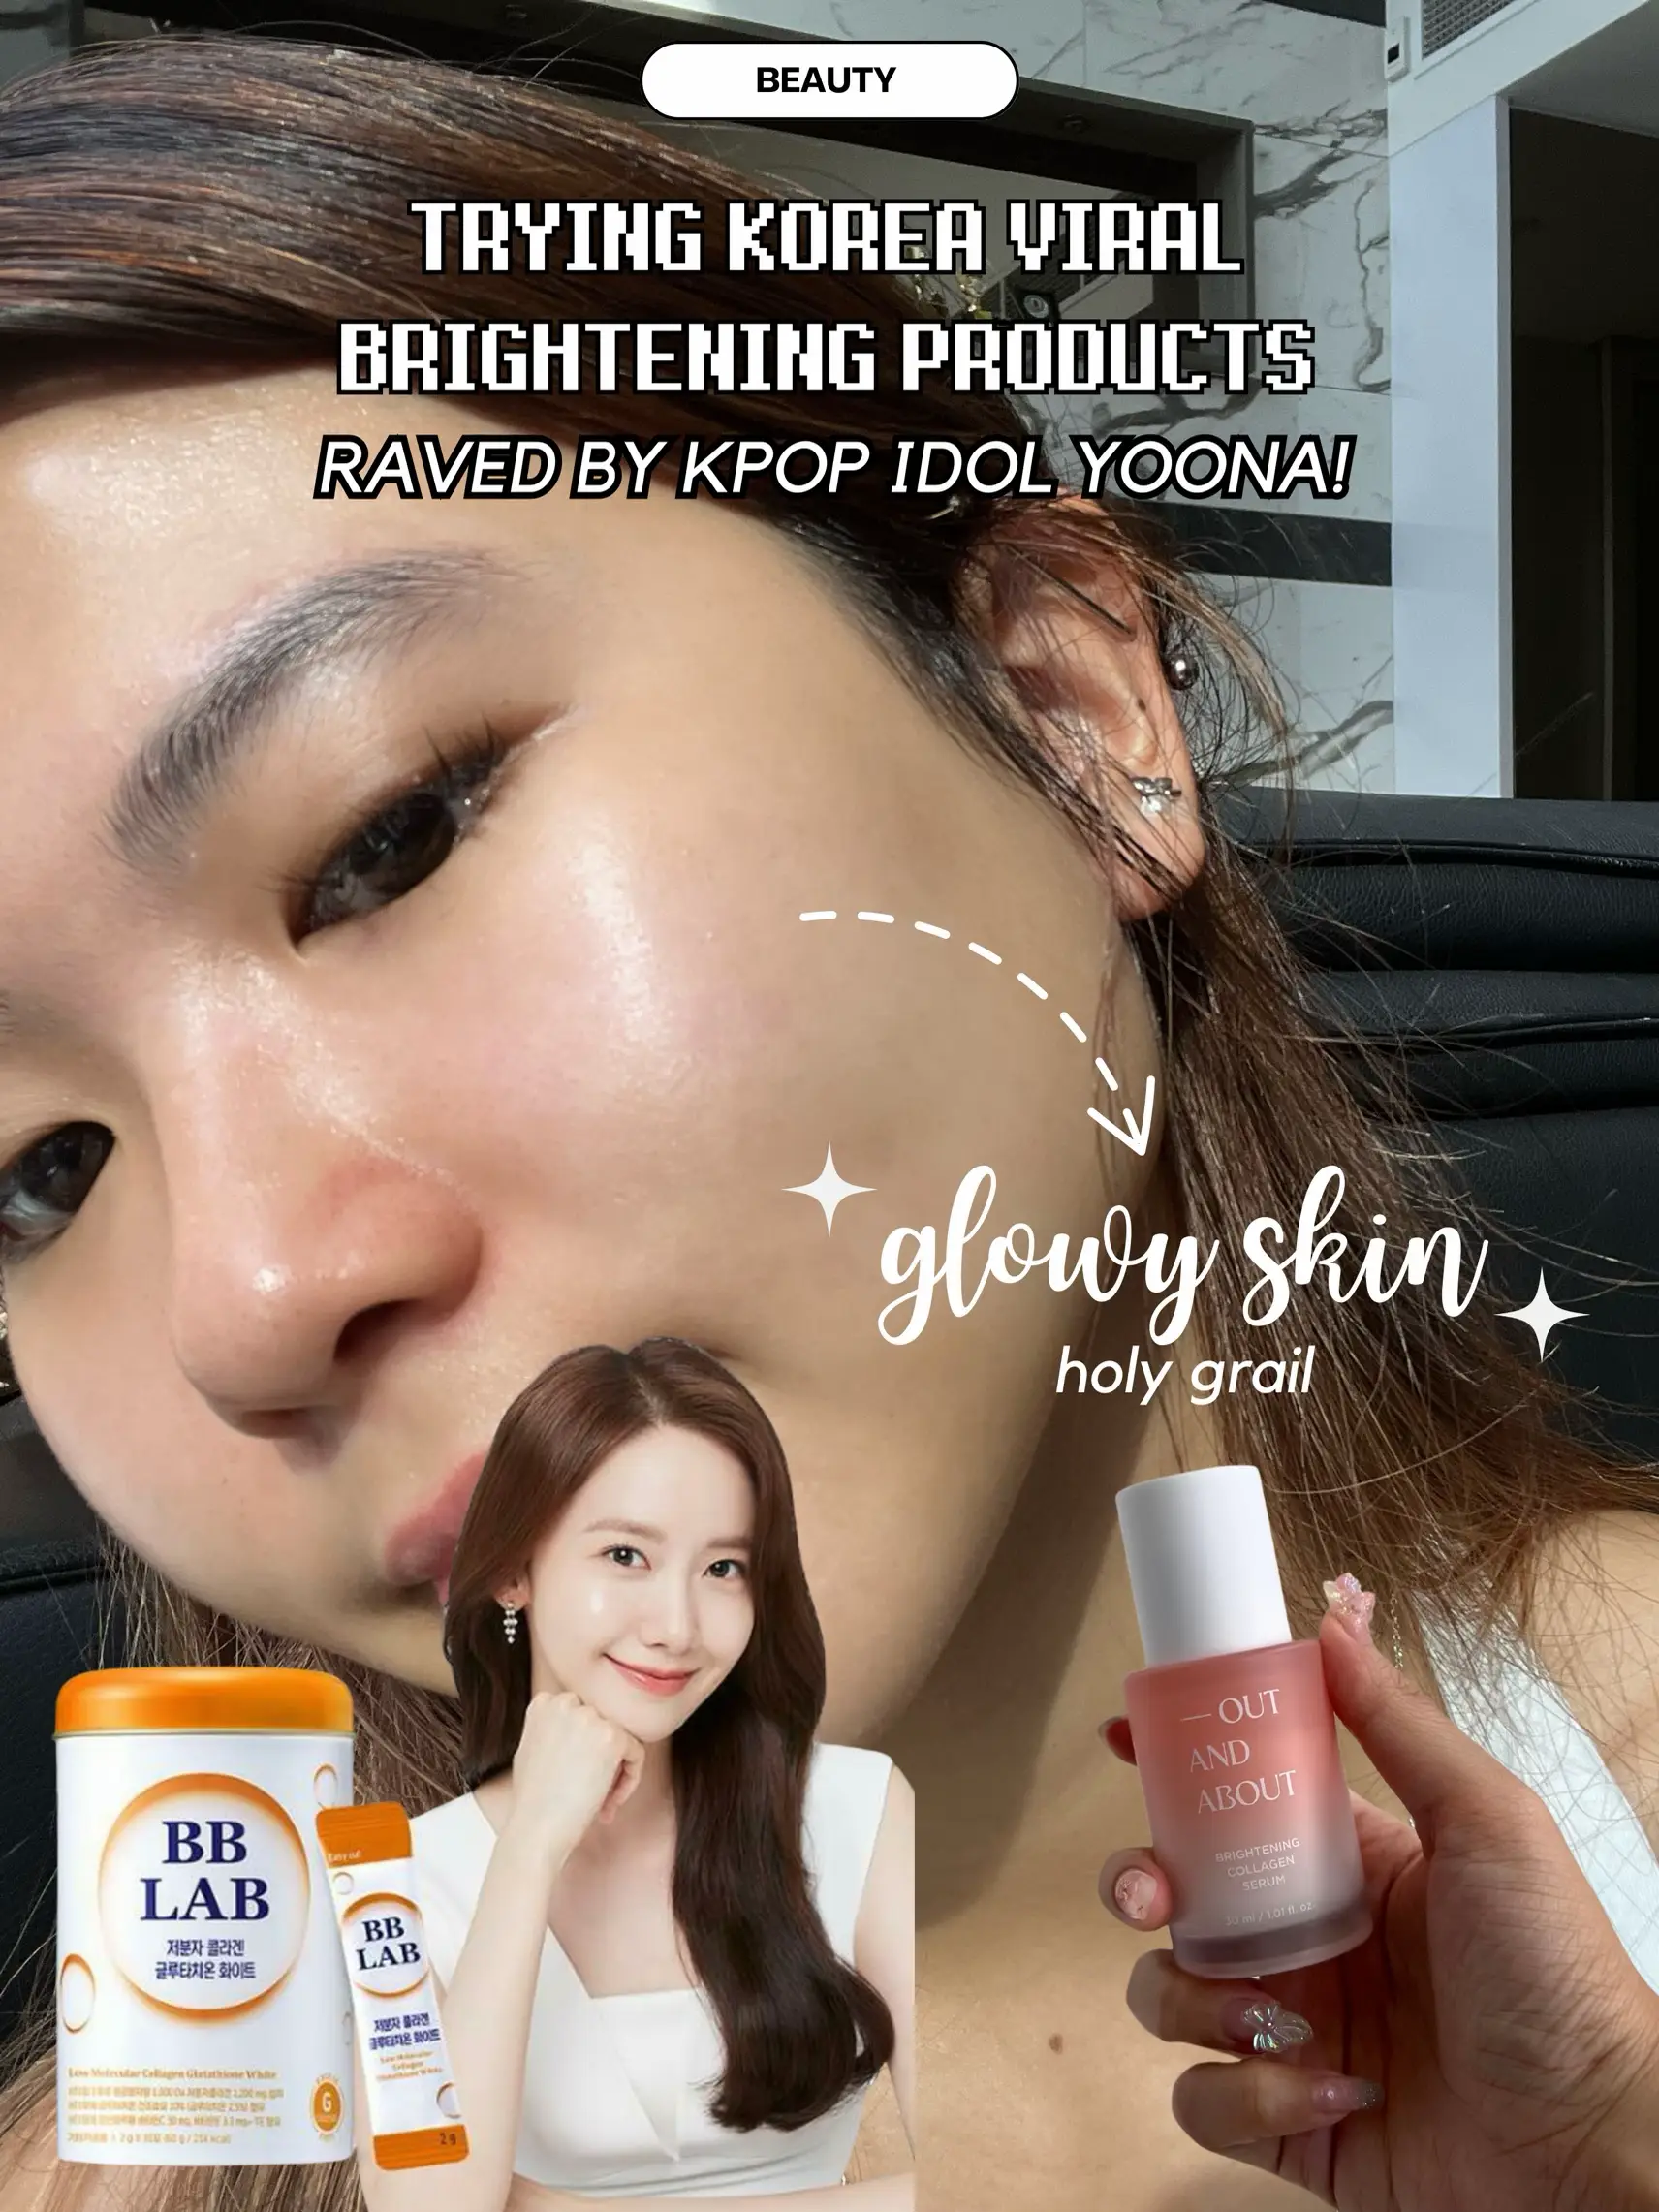 KPOP idol Yoona swears by this for glowy skin?! 🤪's images(0)